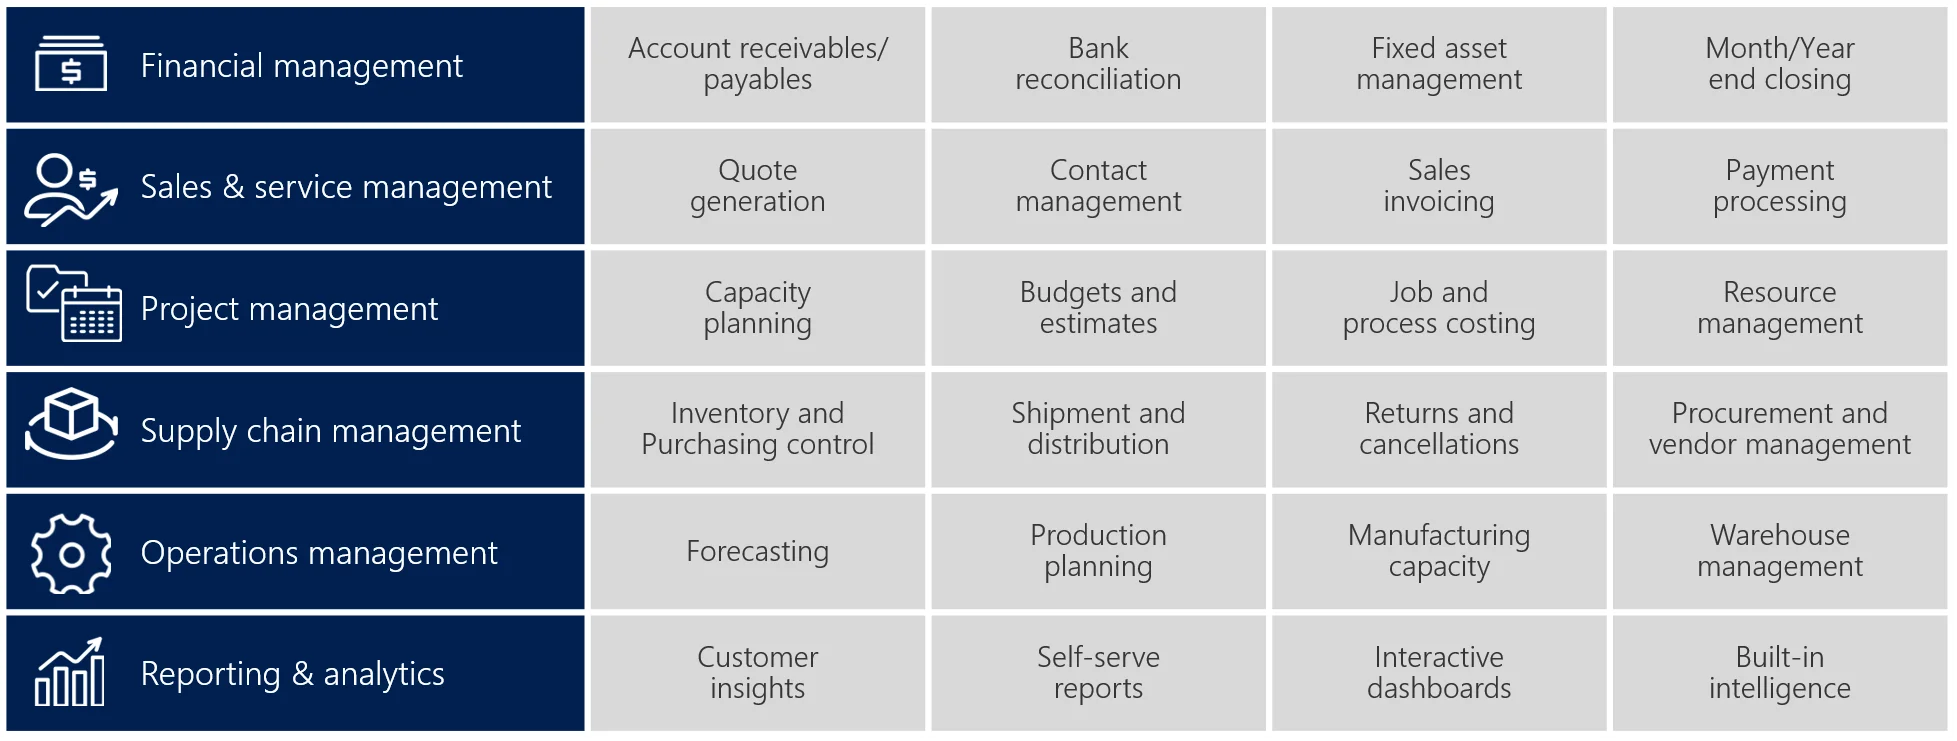 microsoft dynamics 365 business central core capabilities in malaysia & singapore difference between dynamics 365 business central and dynamics 365 finance and operations